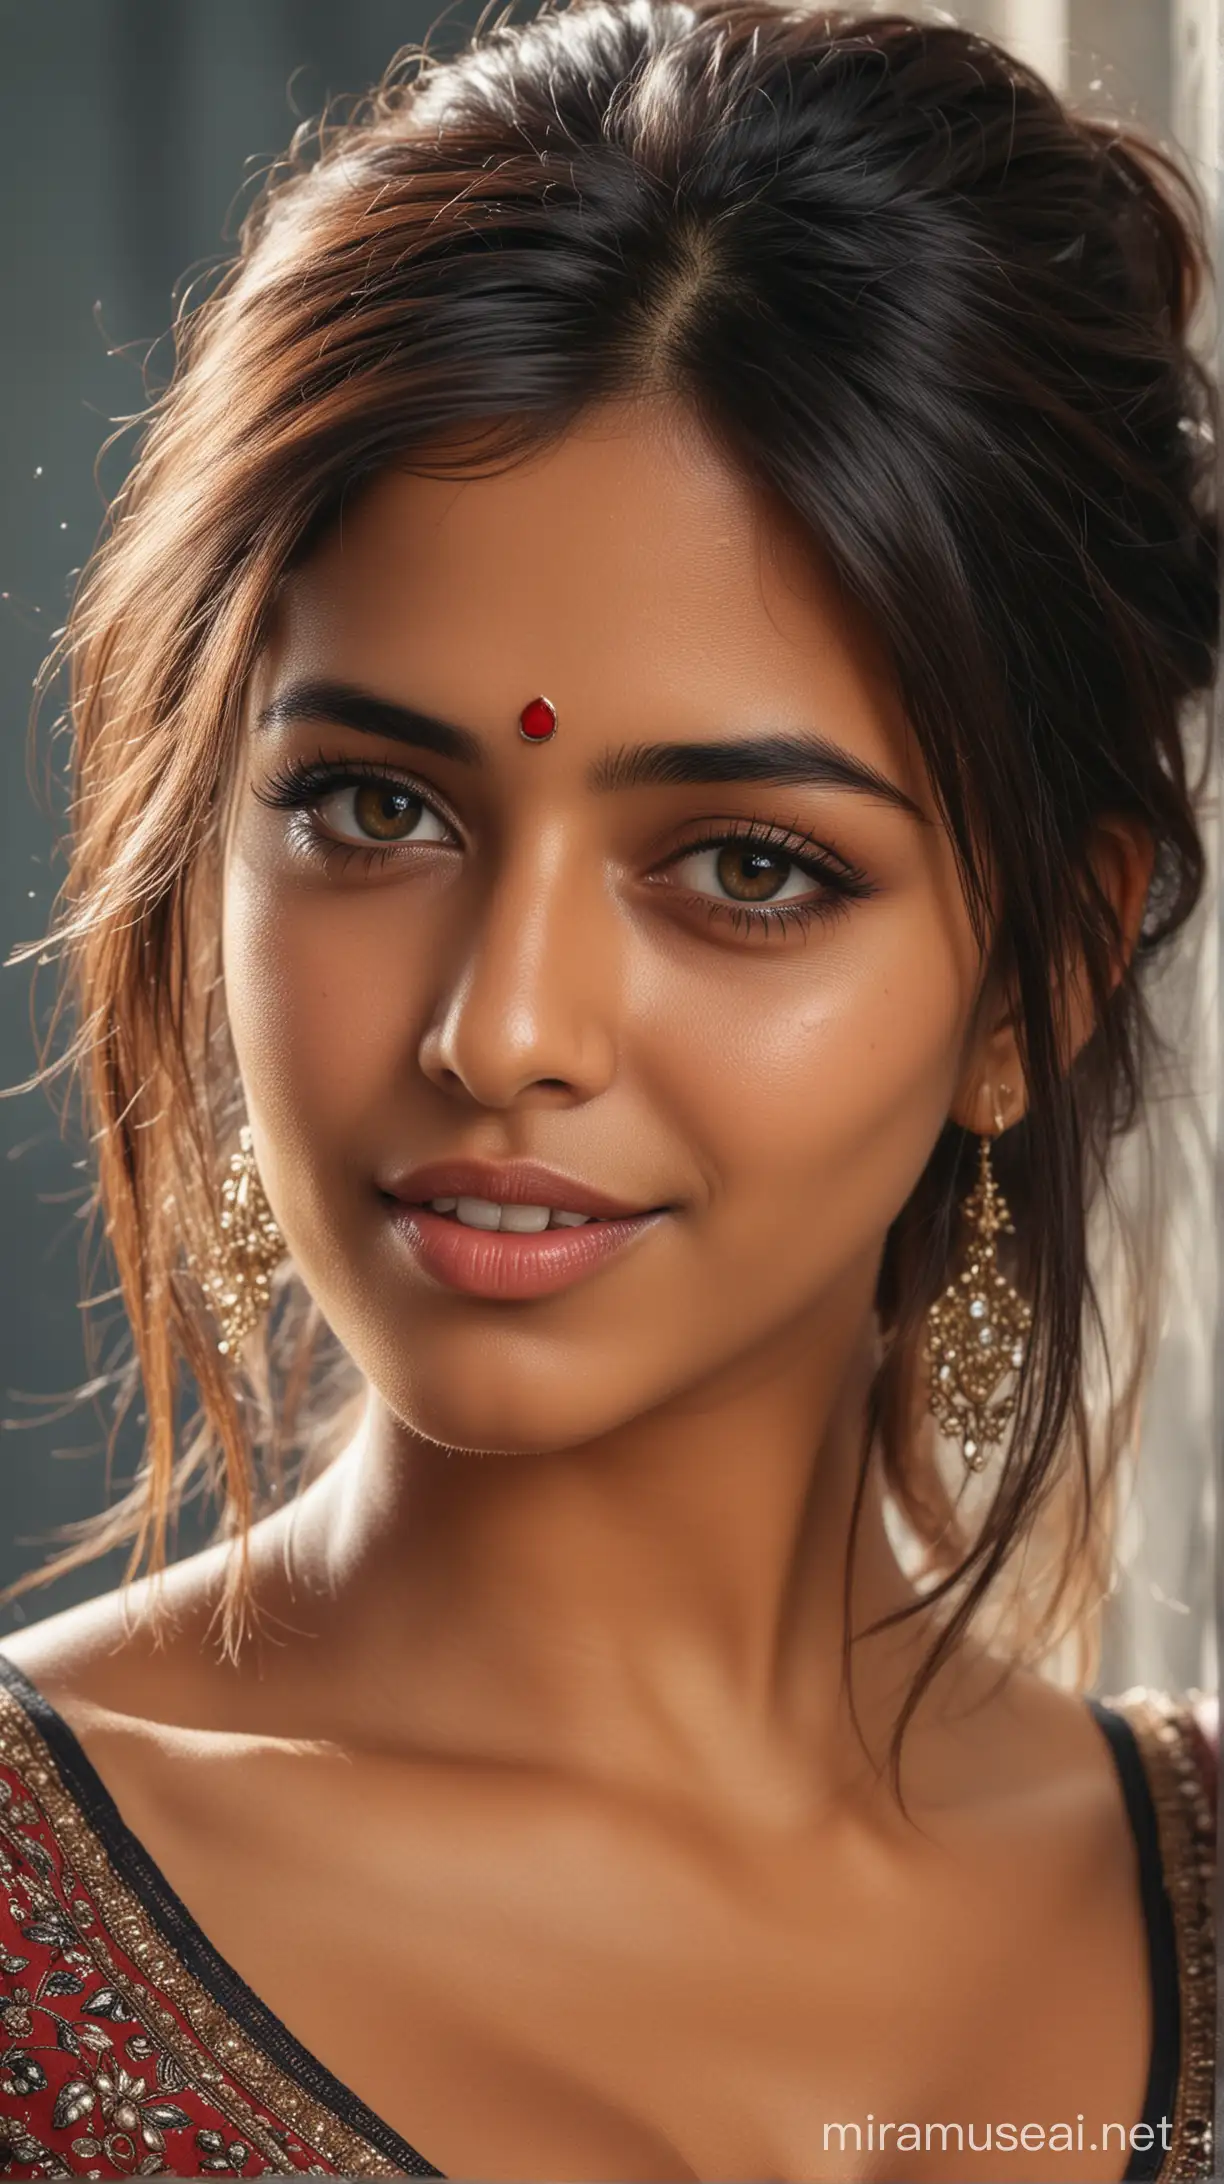 Stunning Indian Woman with Intricate Details and Cinematic Aura